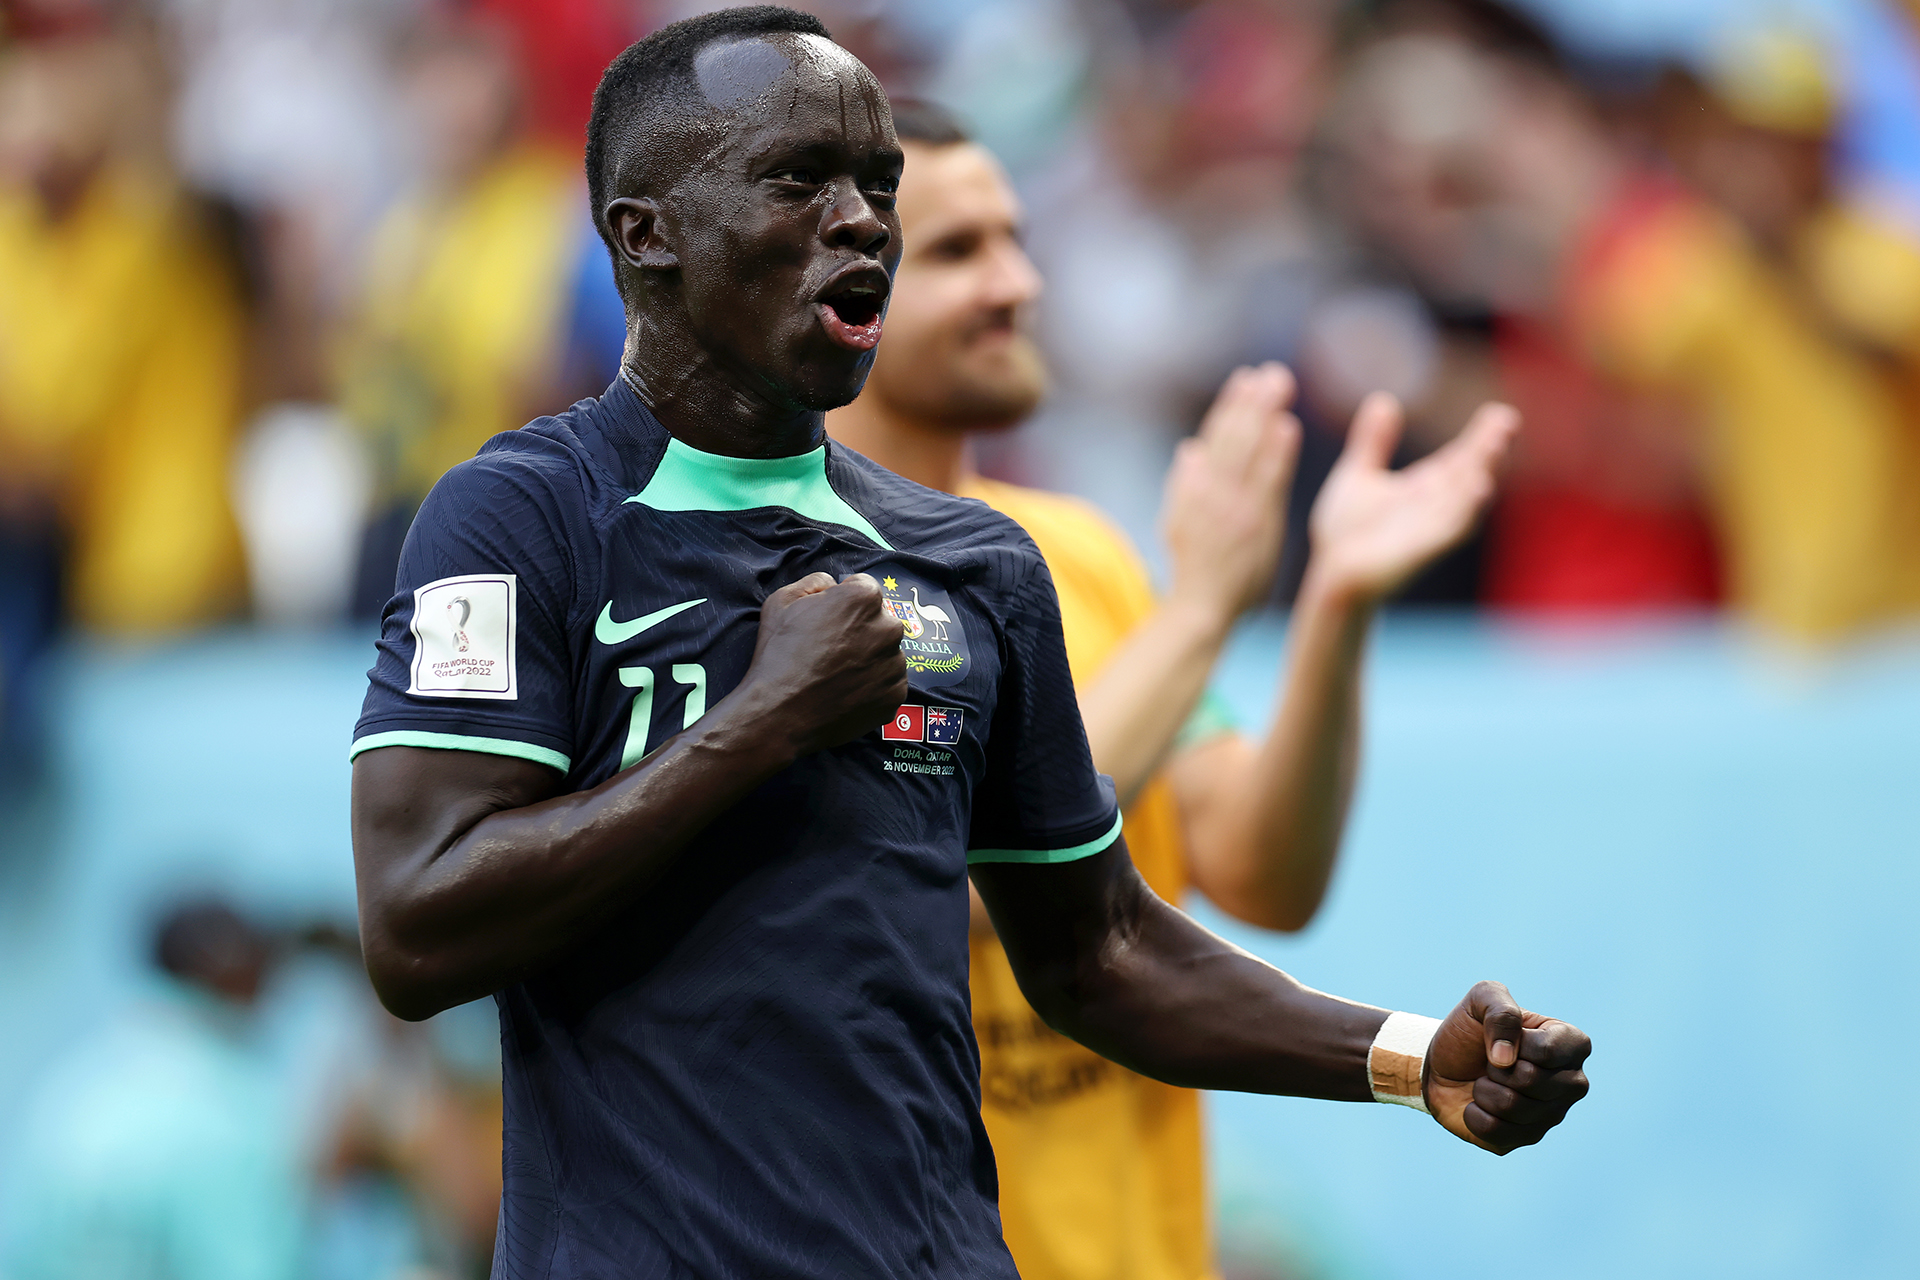 Awer Mabil celebrates after the Socceroos defeated Tunisia at the FIFA World Cup Qatar 2022™